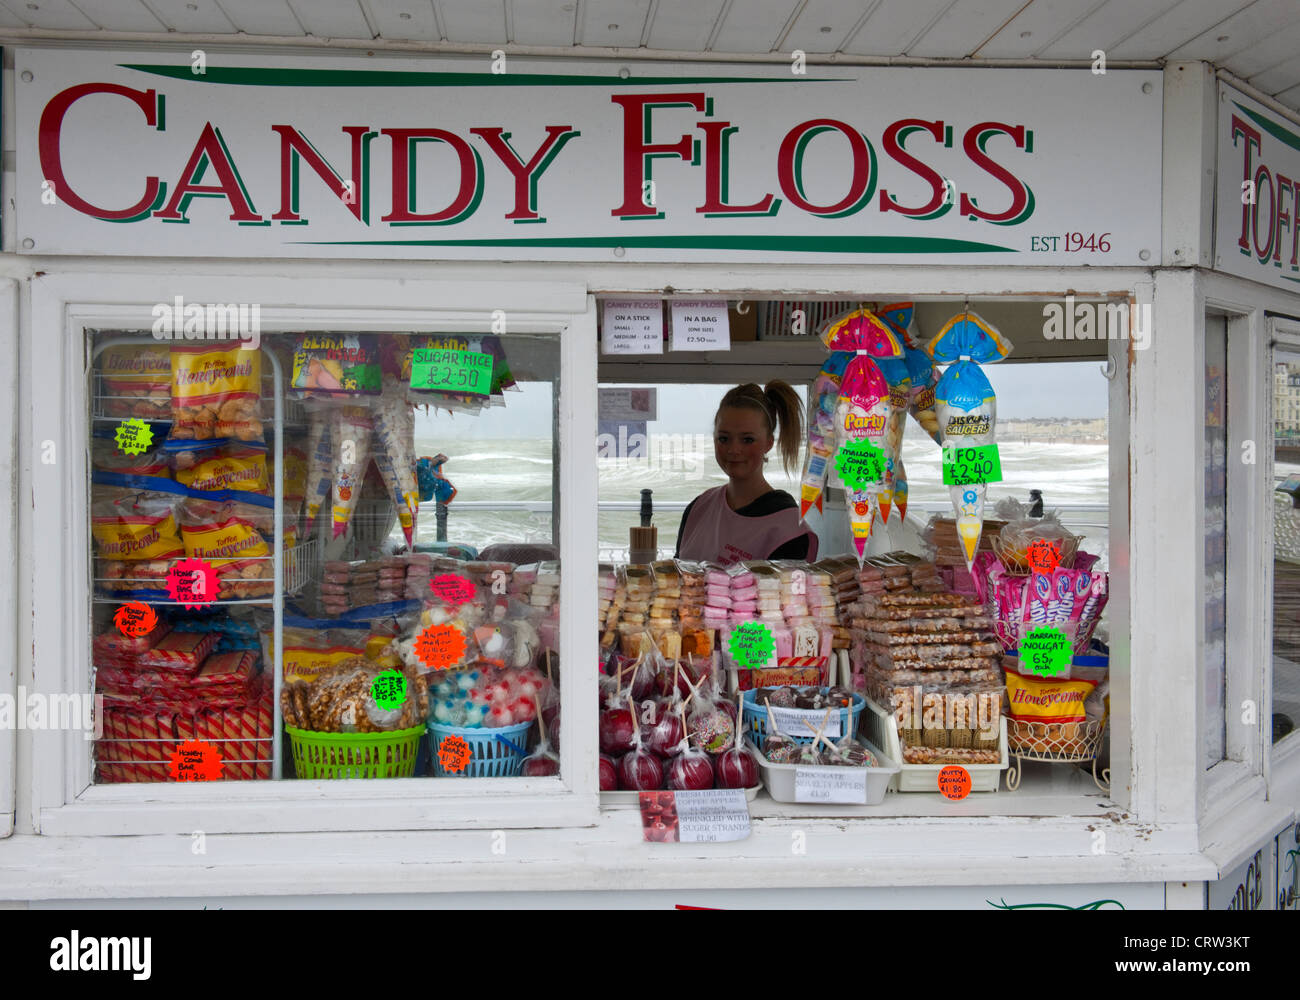 Sweet shop called 'Candy Floss' on Brighton Pier with sweets on display and silhouette of young girl shop assistant Stock Photo